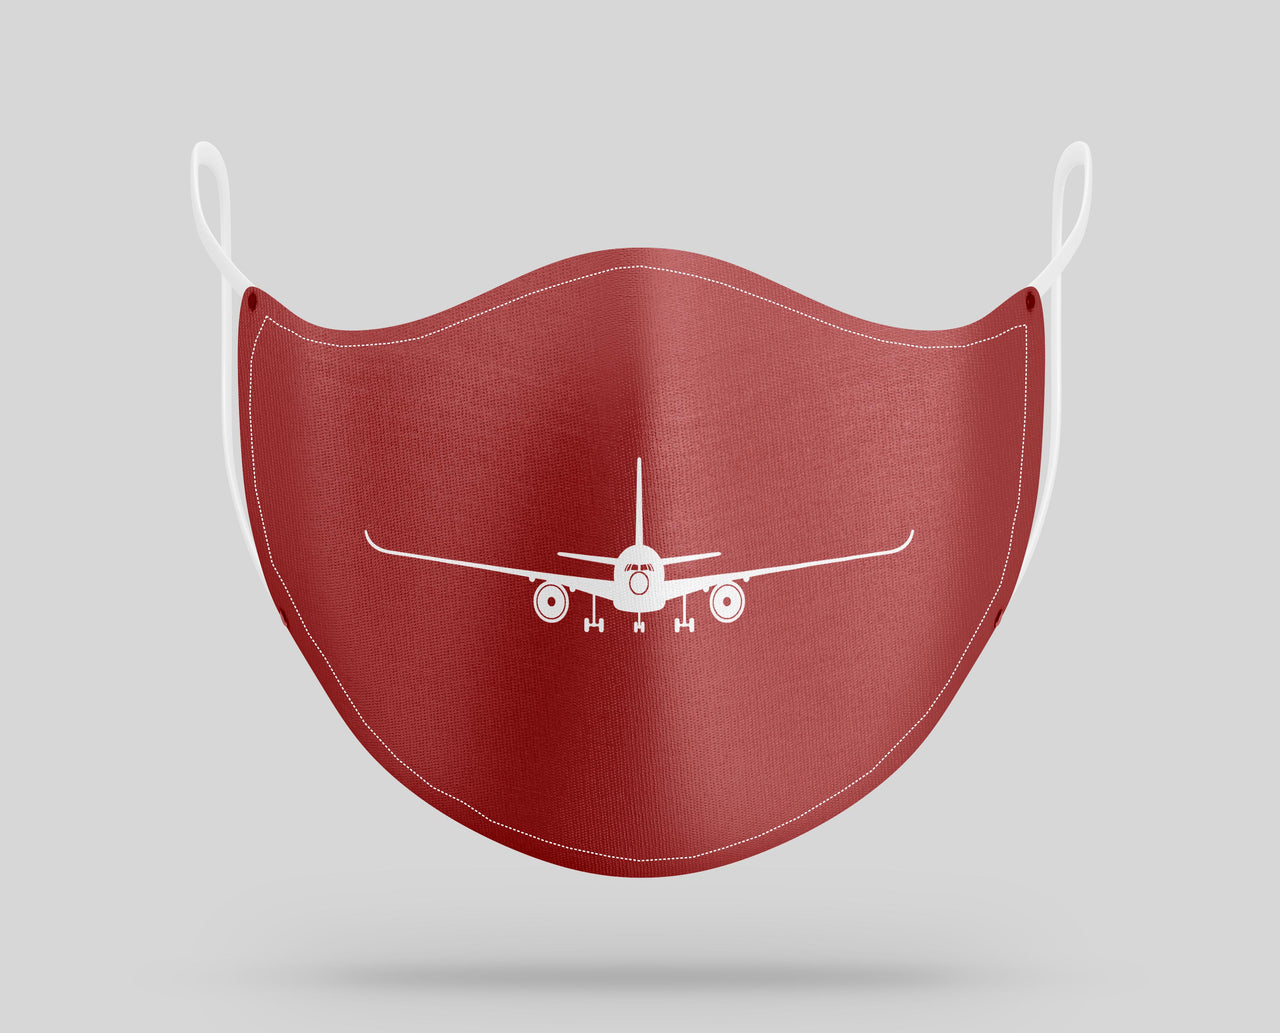 Airbus A350 Silhouette Designed Face Masks